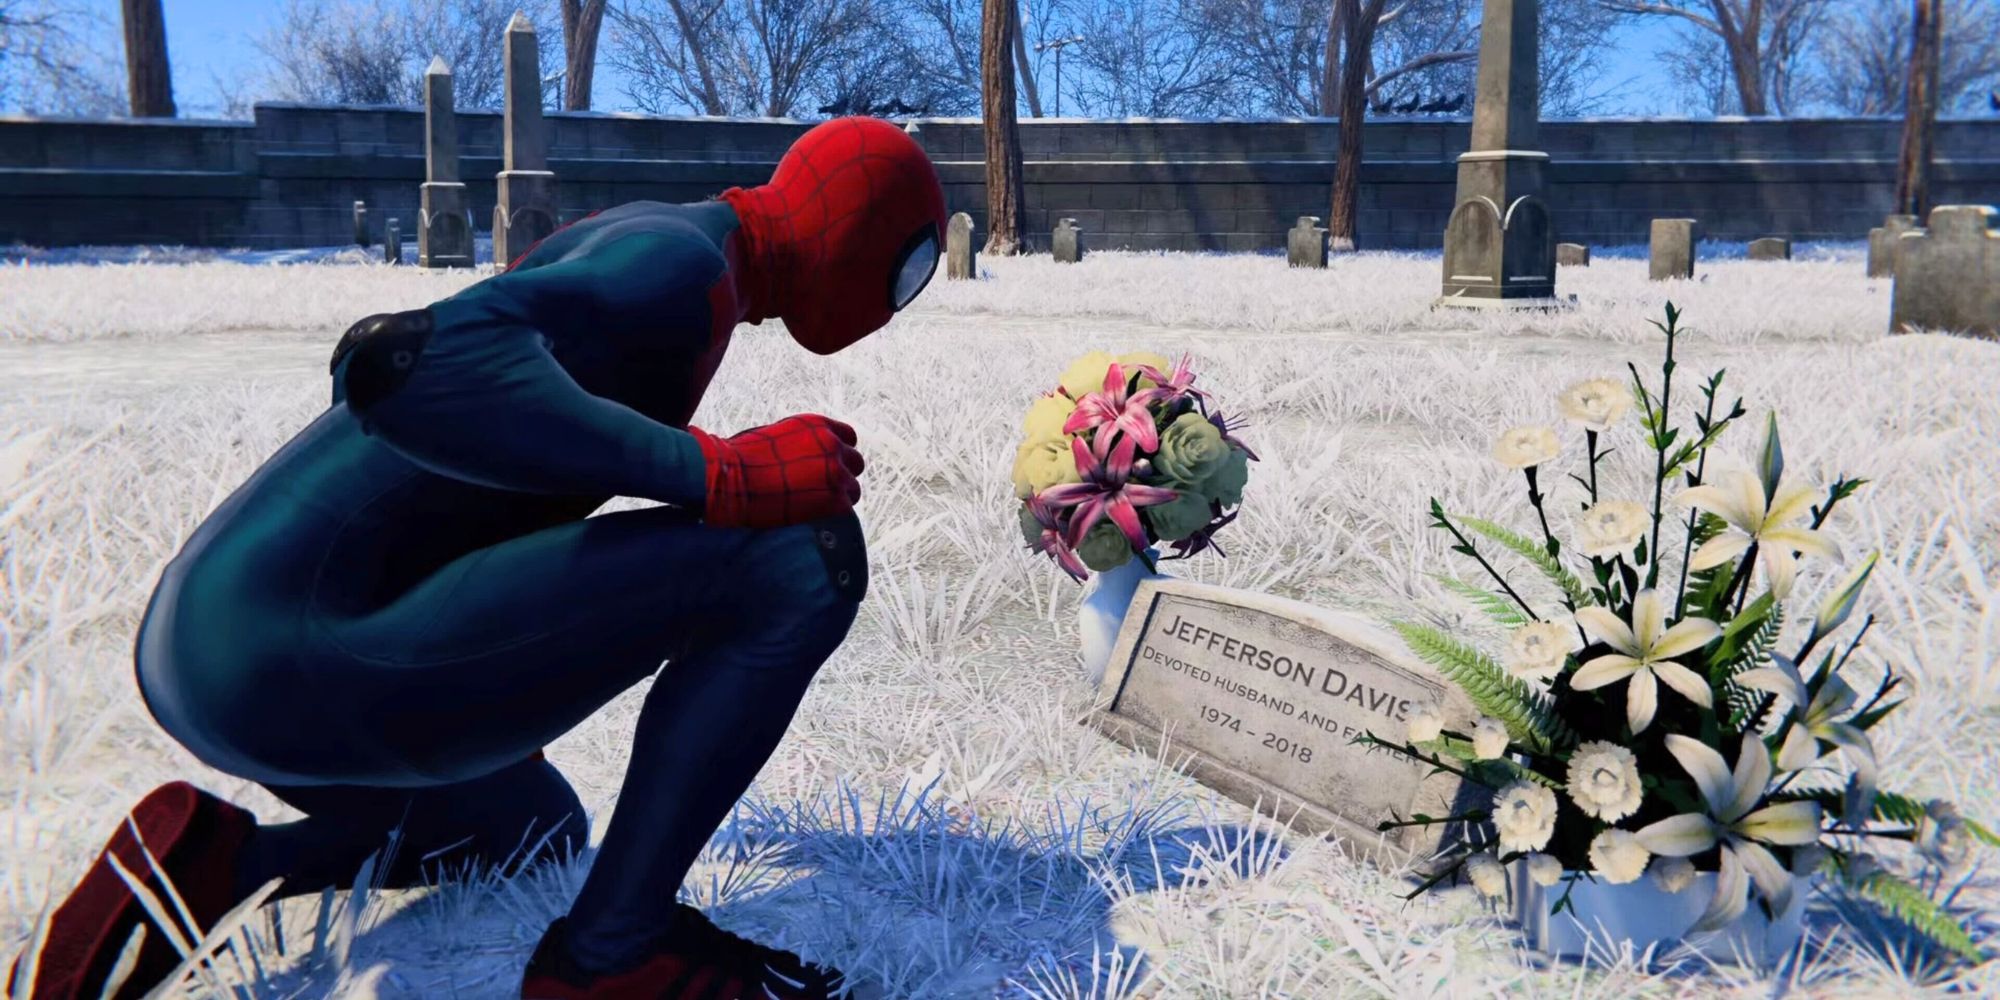 Miles Morales as Spider-Man paying respects at his father's grave.